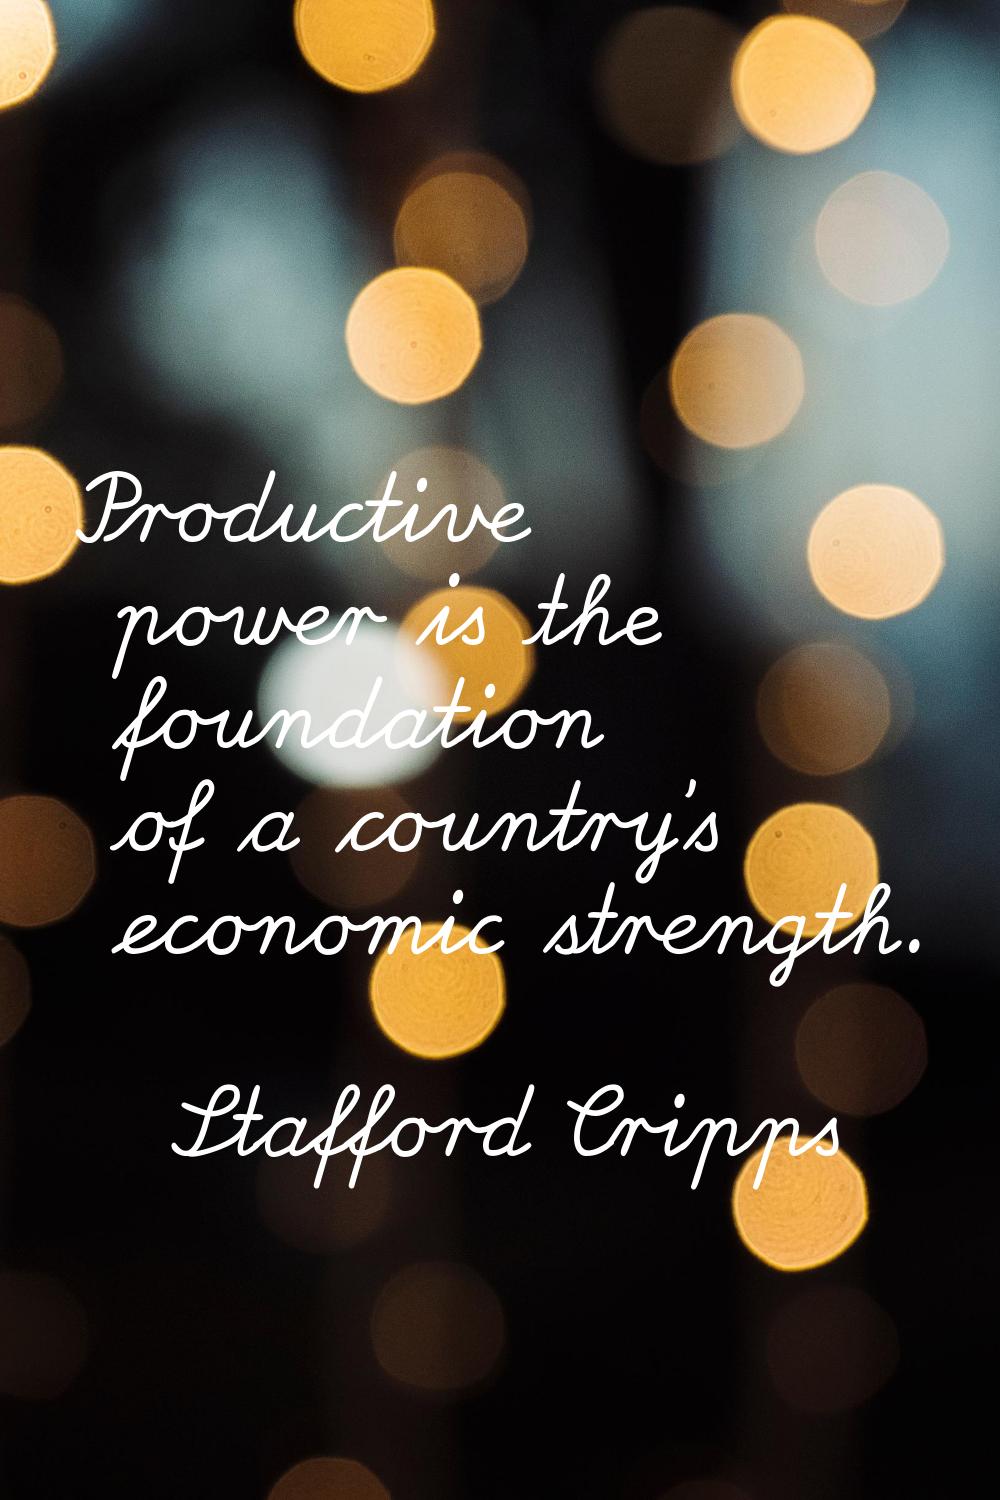 Productive power is the foundation of a country's economic strength.